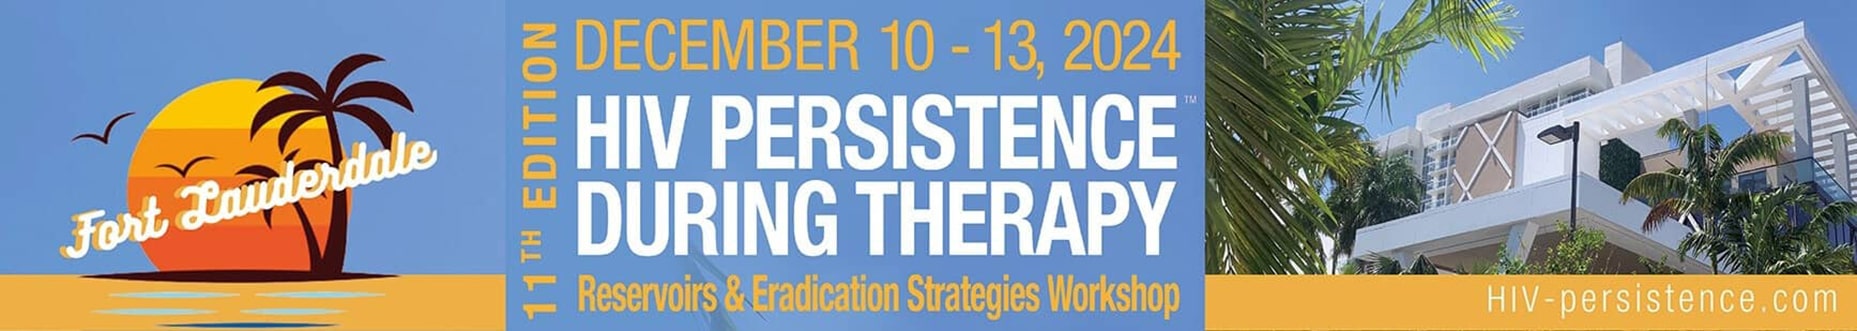 HIV Persistence during therapy